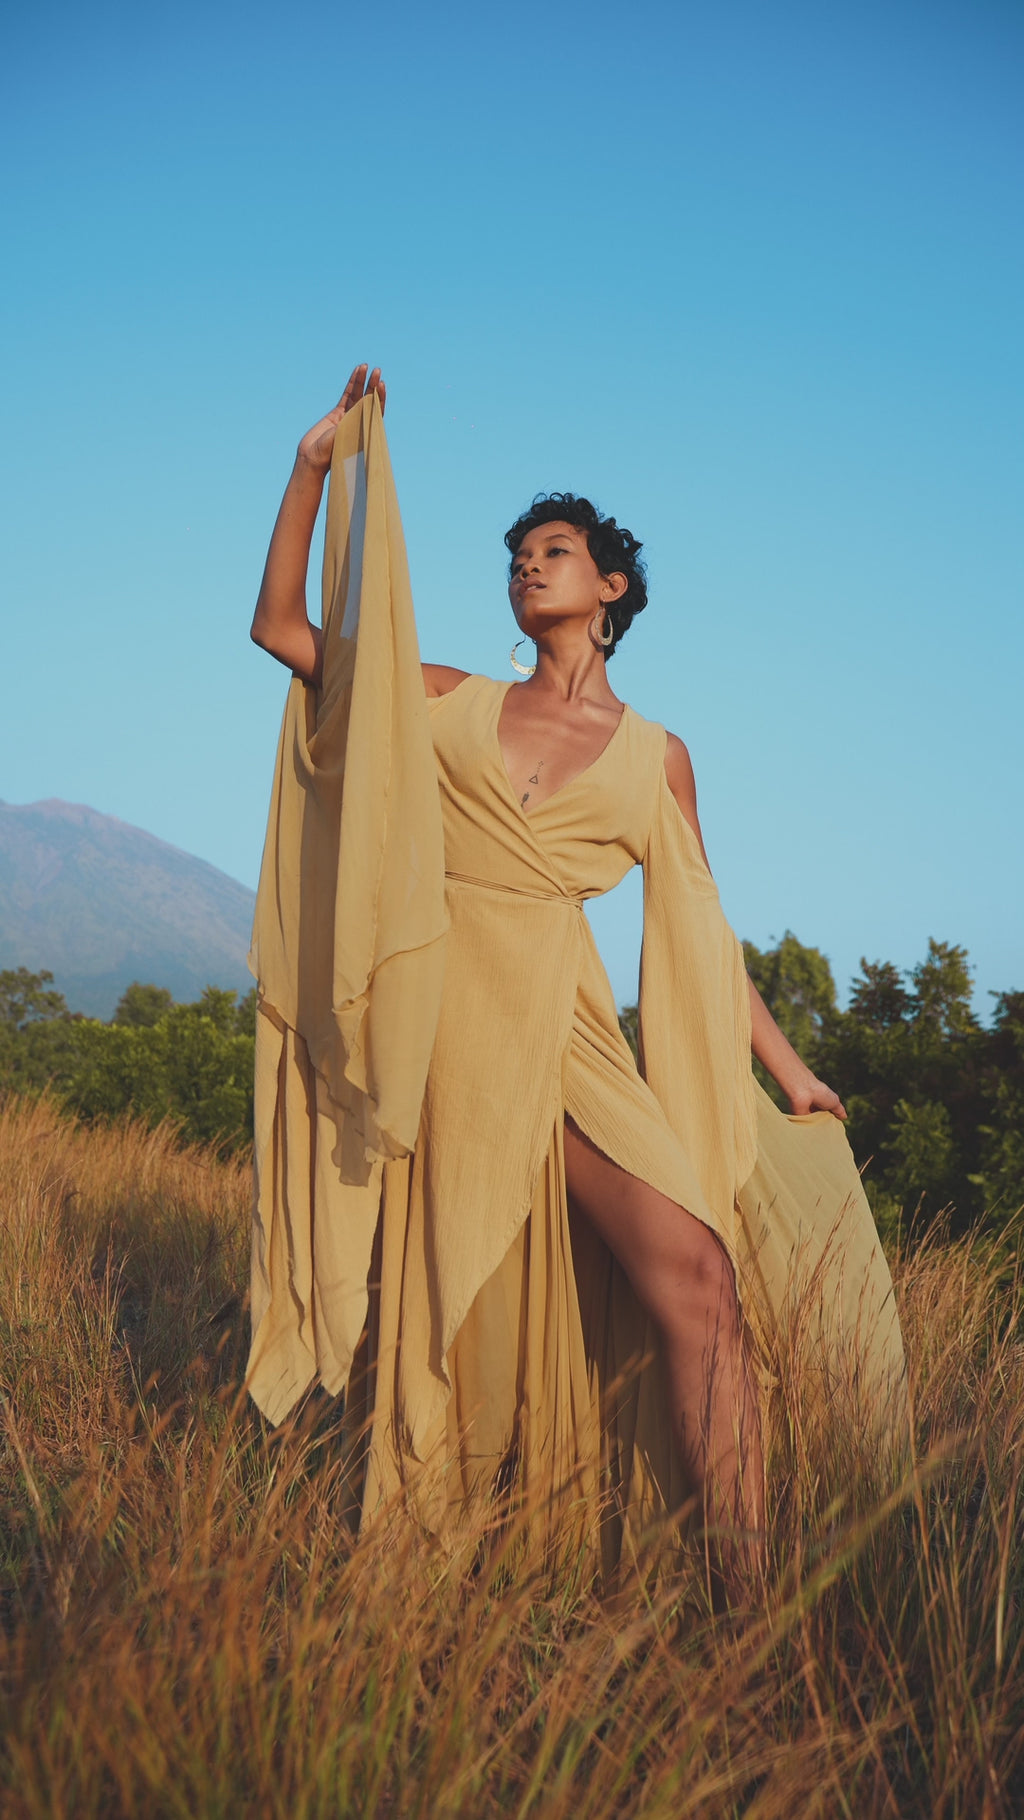 Look irresistible in Aya Sacred Wear's Ochre Boho Goddess Dress with wings. Shop this unique style now!